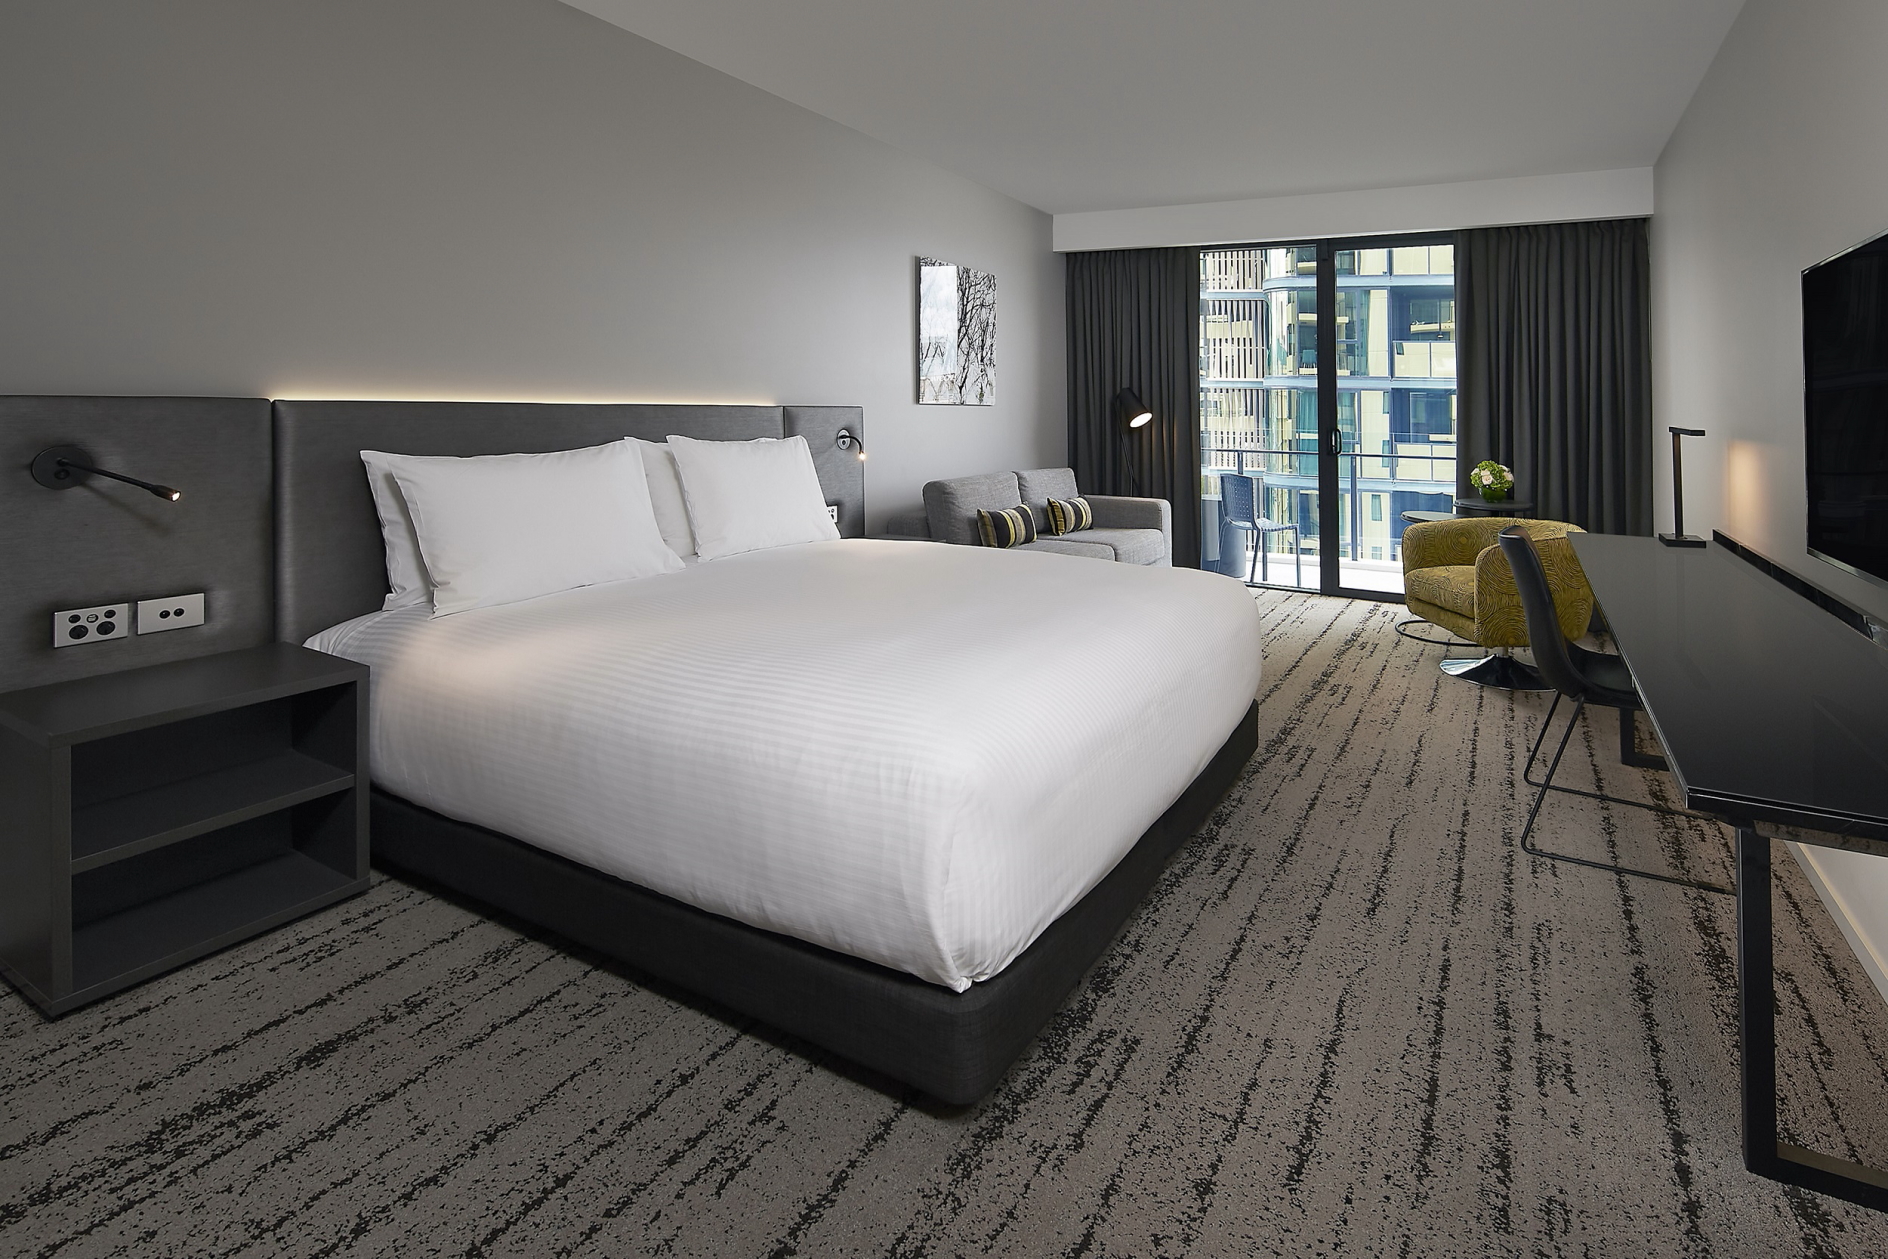 Premier River View Room at Courtyard by Marriott Brisbane. Click to enlarge.